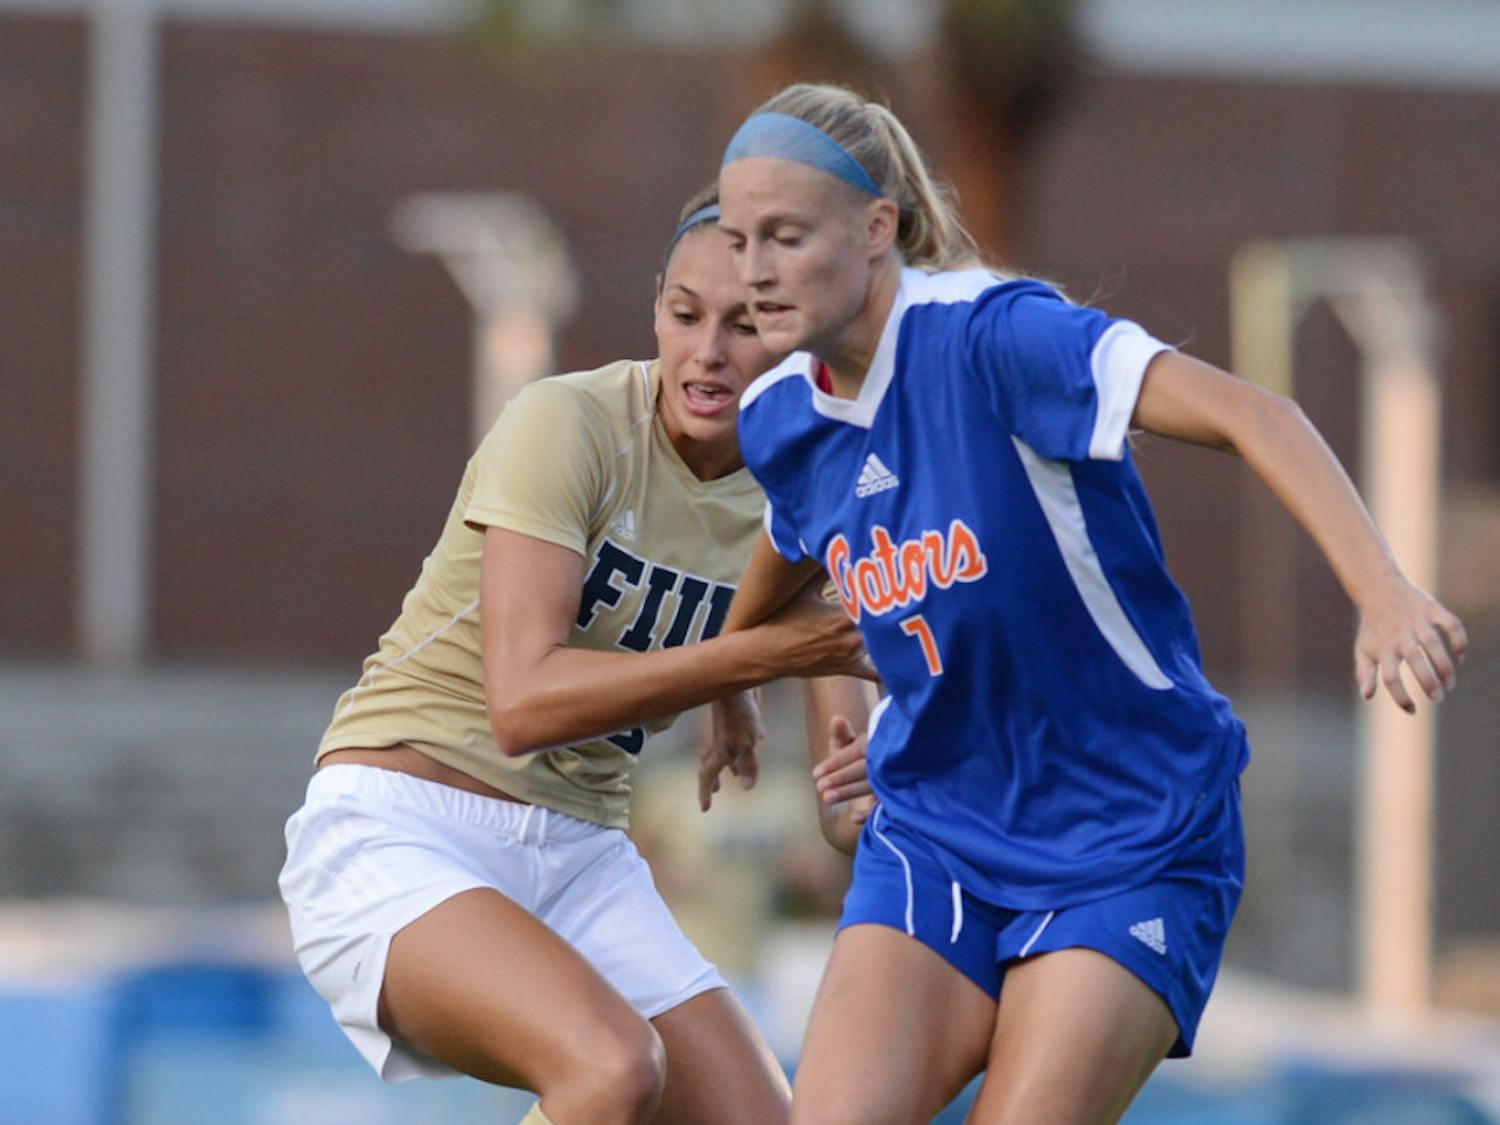 Florida center back Kat Williamson fights for the ball against FIU on Sept. 7. Williamson suffered a torn right meniscus during the game.
